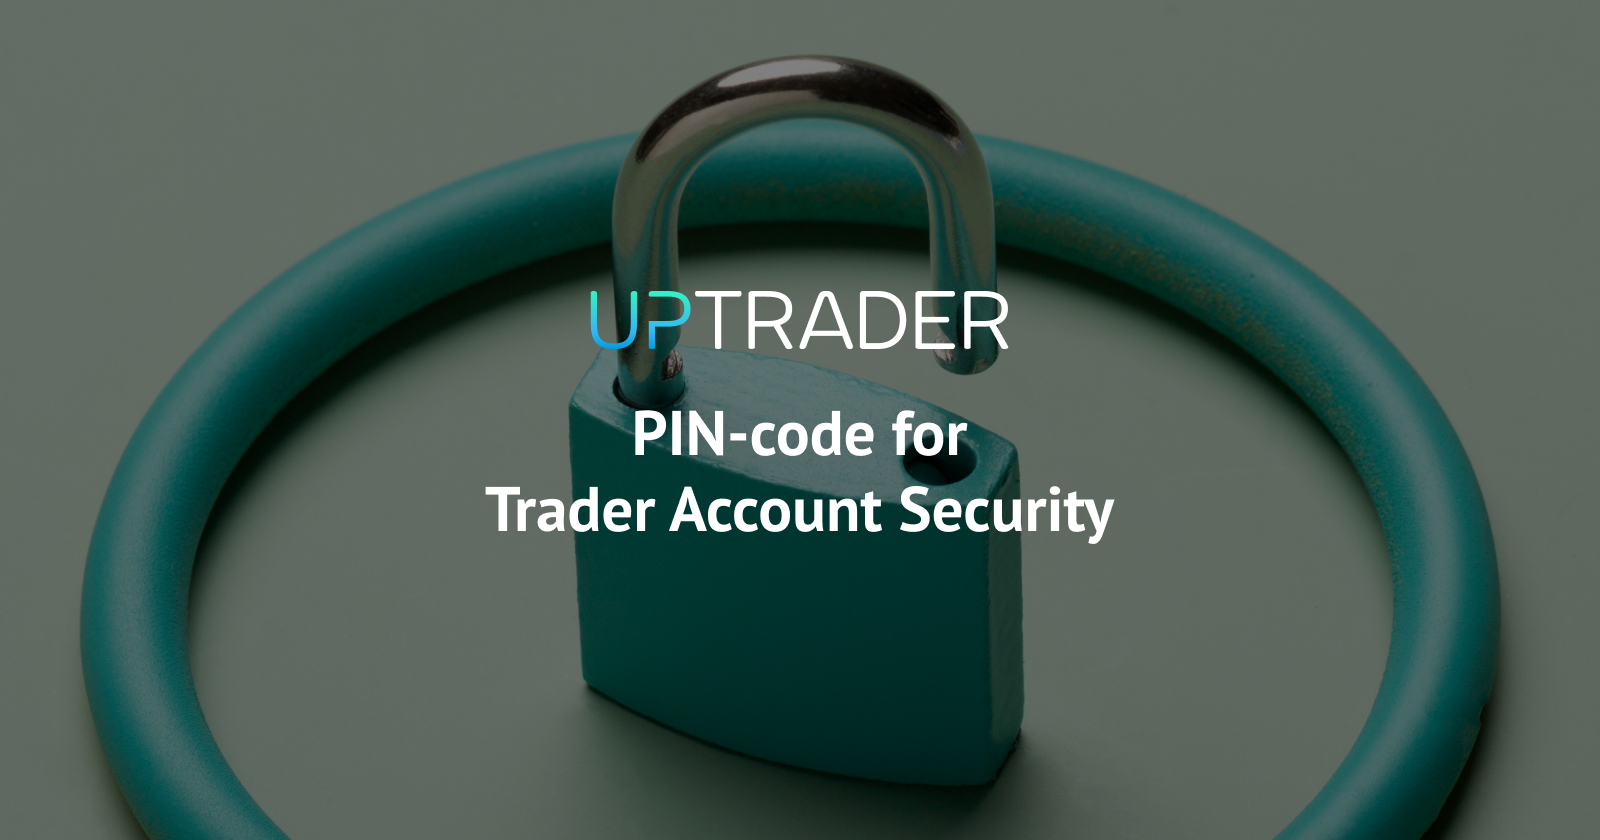 PIN-code for Trader Account Security